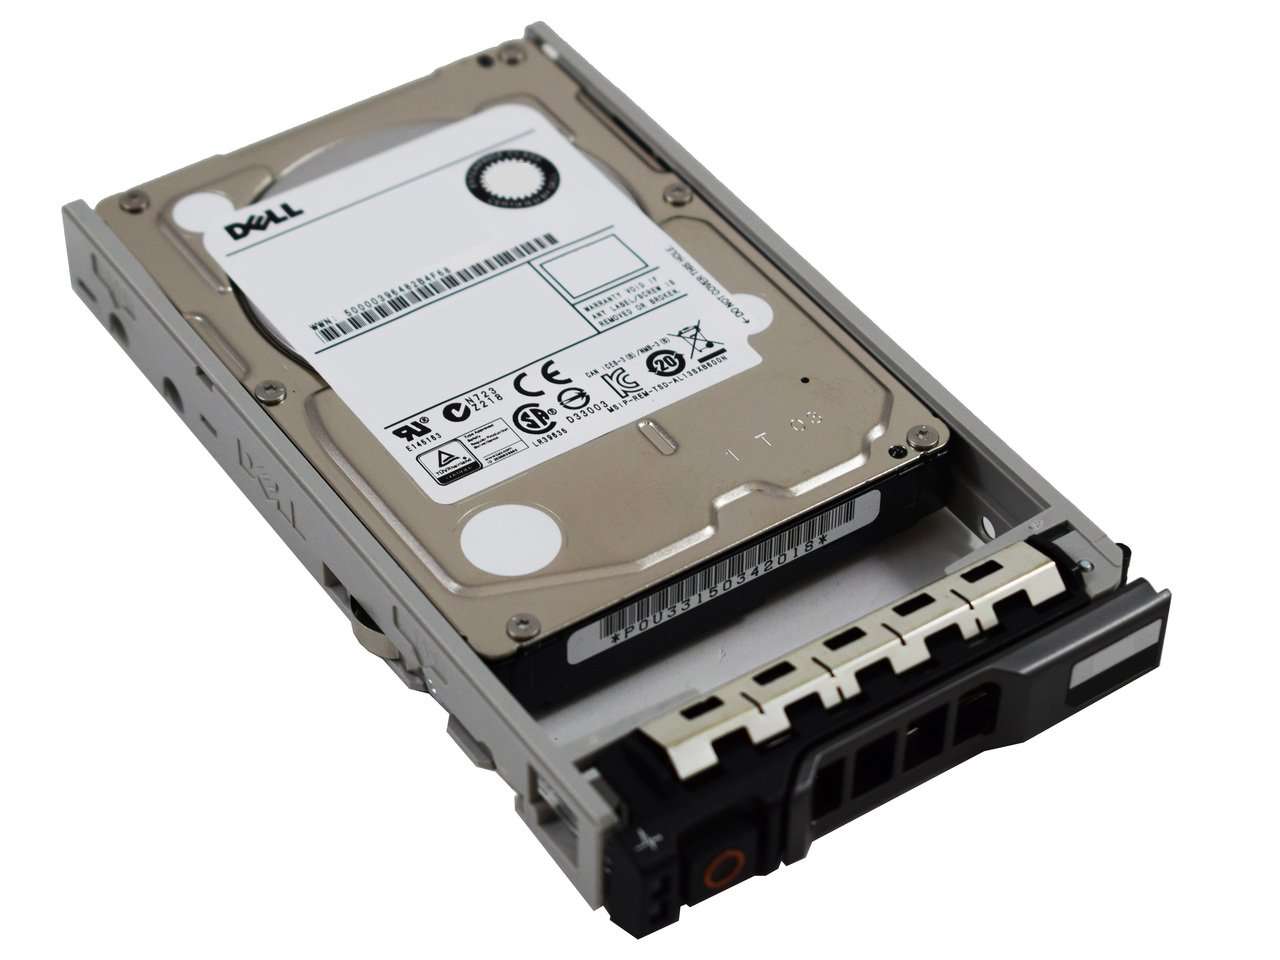 Dell G13 0620CK 600GB 10K RPM SAS 12Gb/s 512n 2.5" Manufacturer Recertified HDD